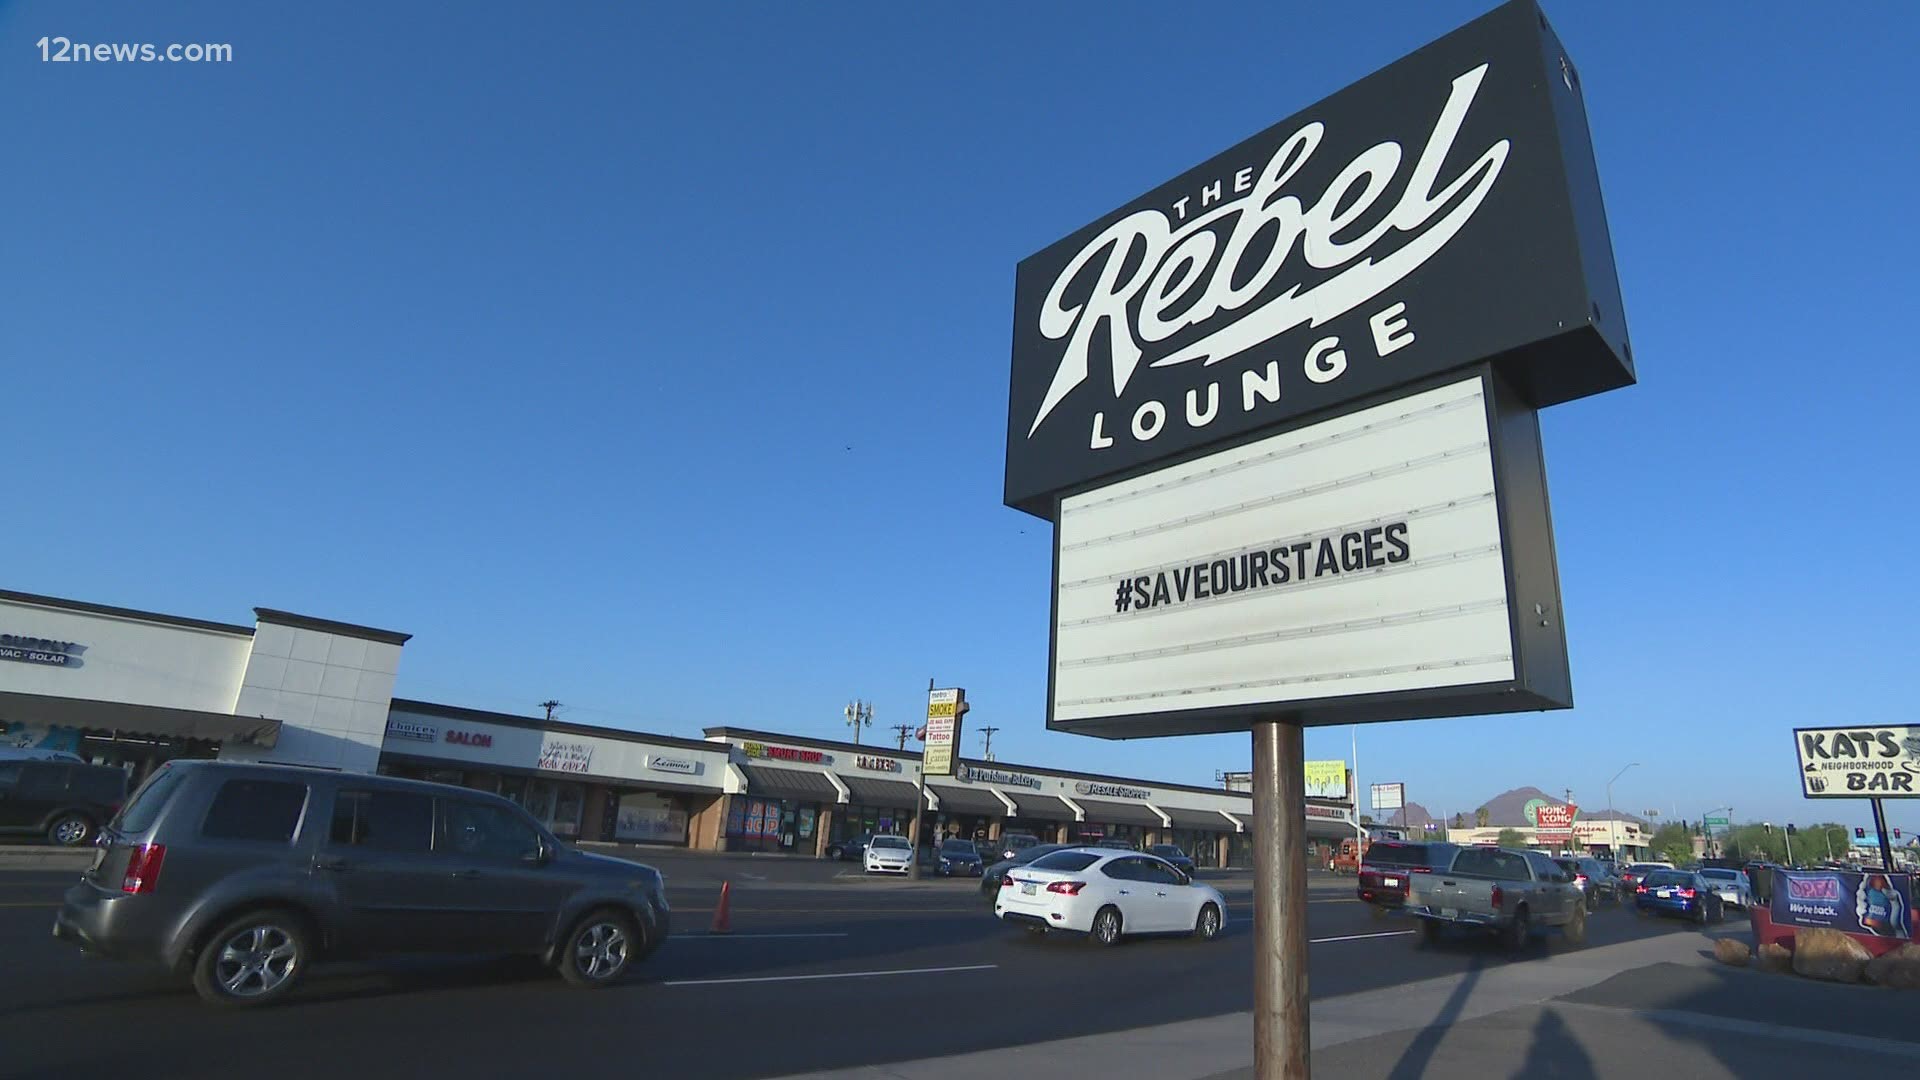 The Rebel Lounge in Phoenix has been closed for seven months due to the coronavirus pandemic. It will reopen this weekend and some new changes will be debuting.